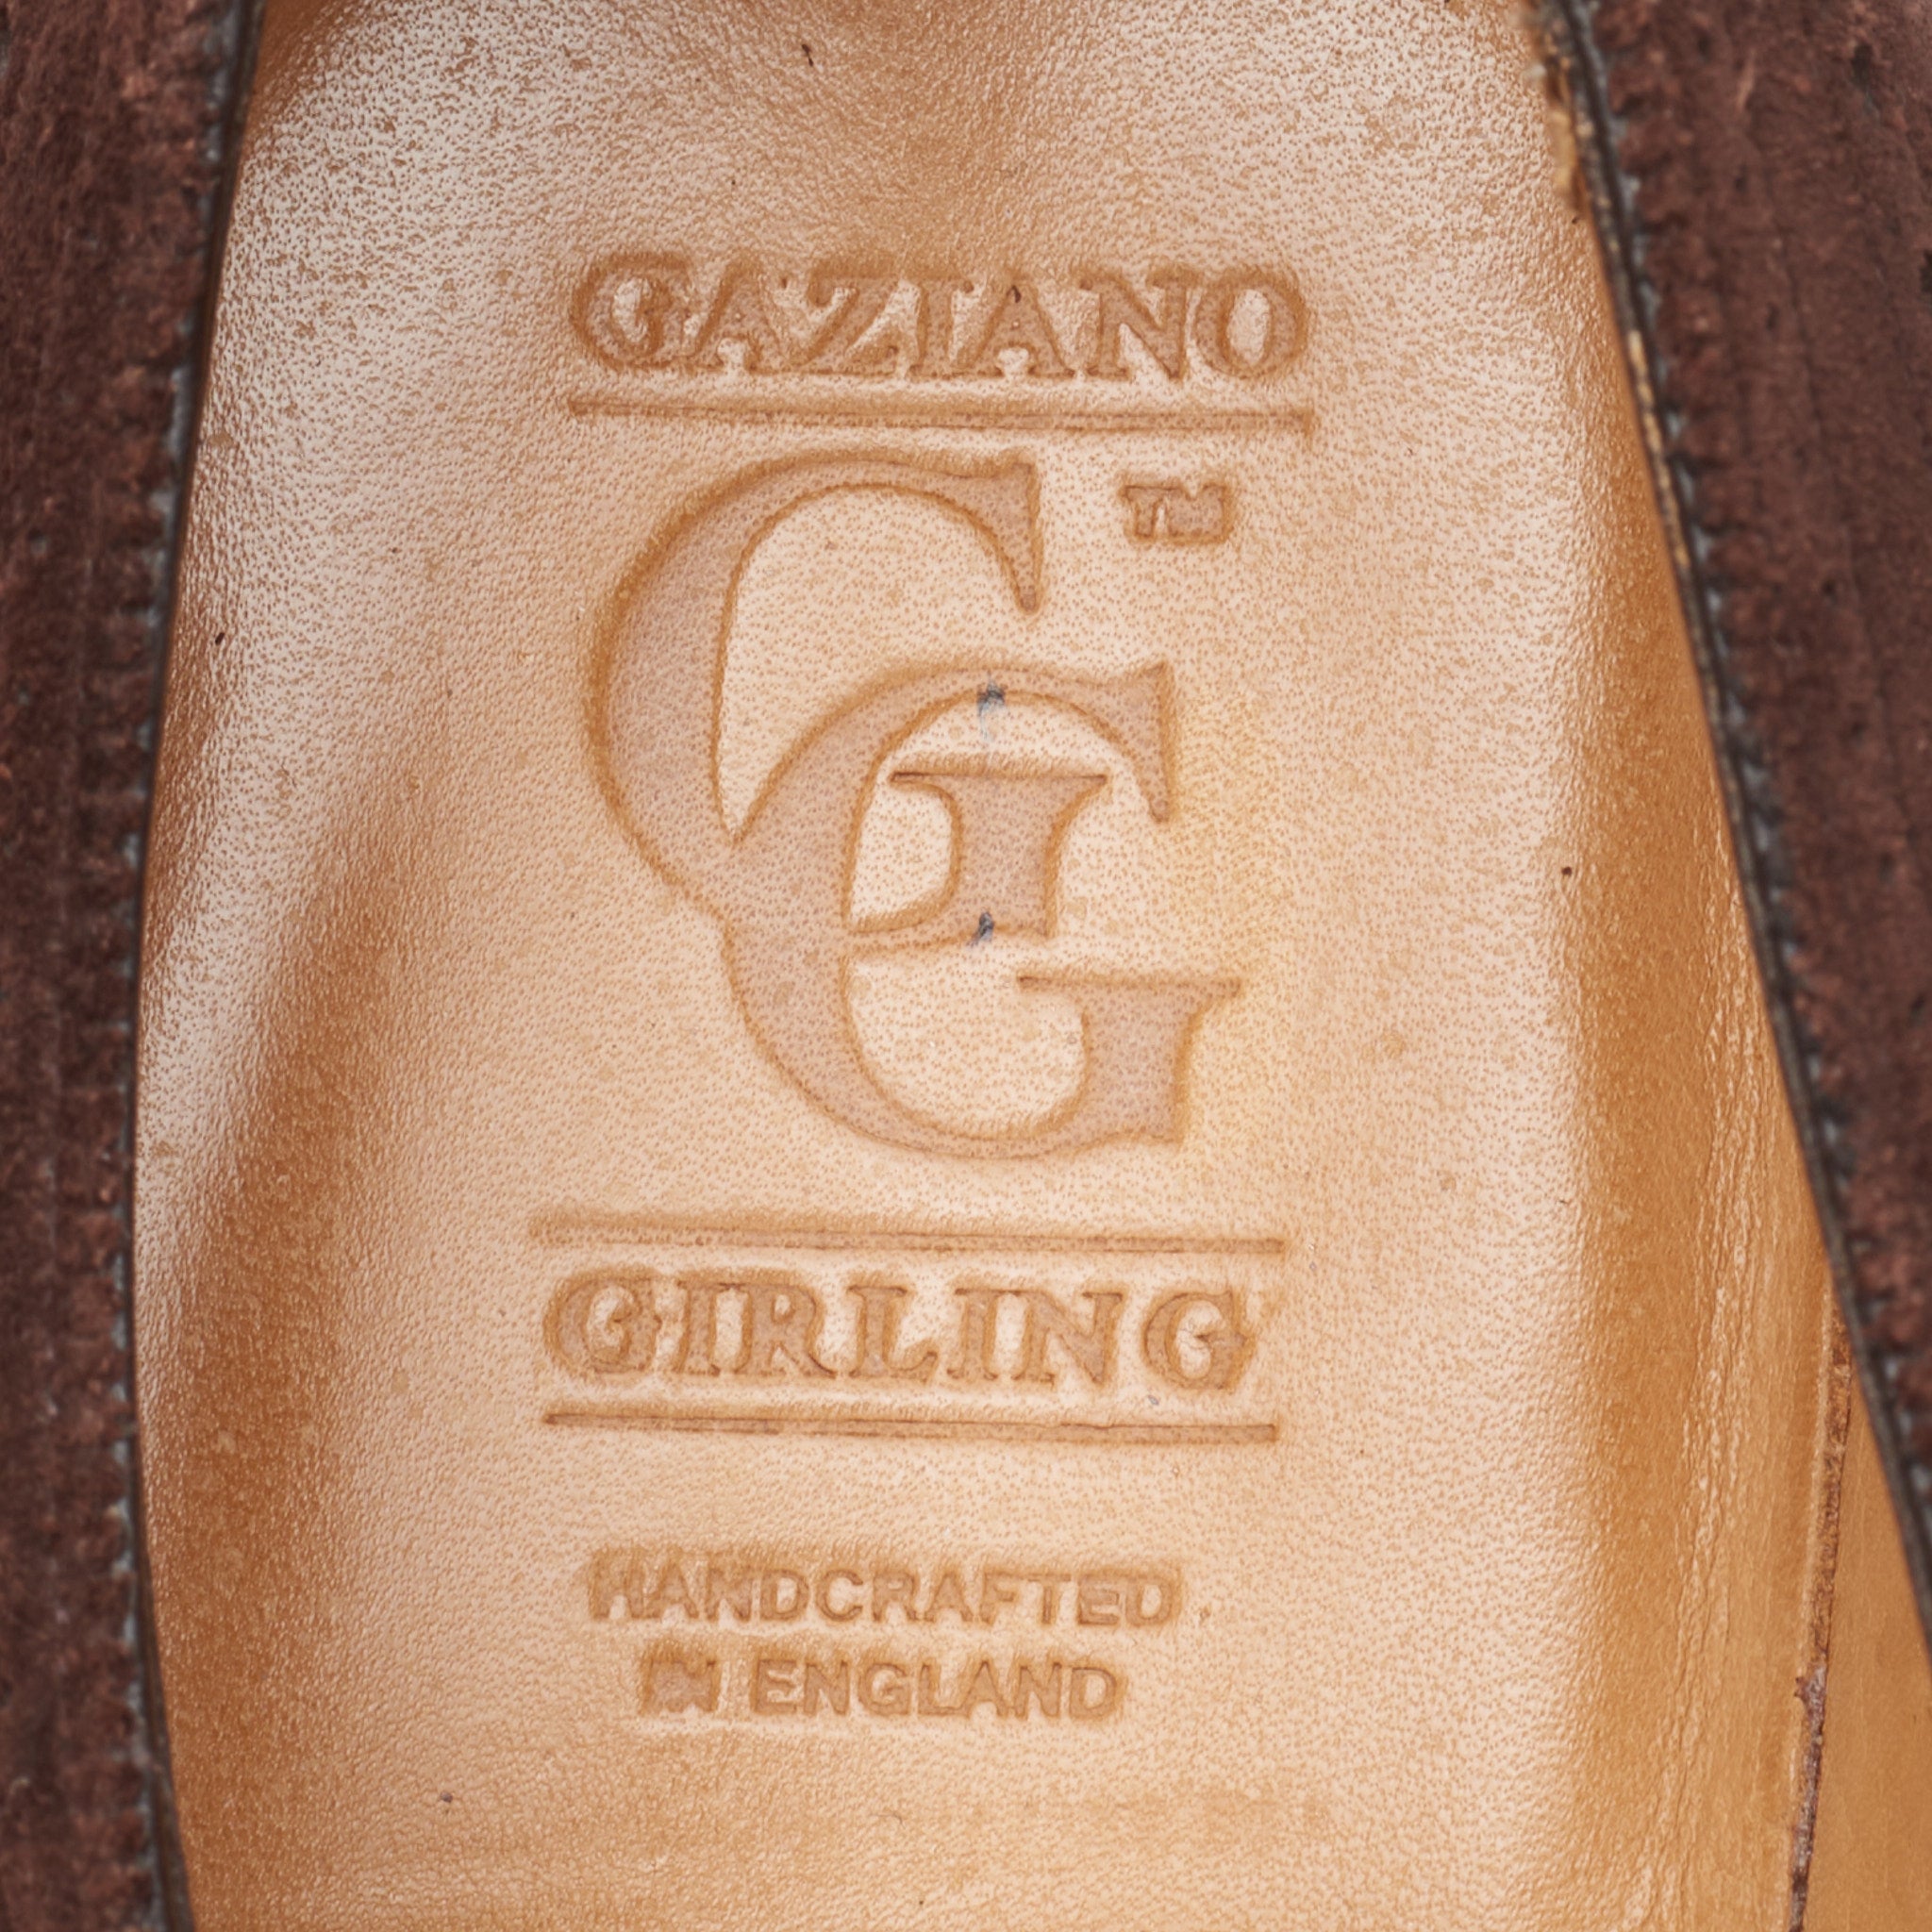 GAZIANO & GIRLING "Woburn" Mole Suede Leather Derby Dress Shoes 8E US 8.5 Last MH71 GAZIANO & GIRLING